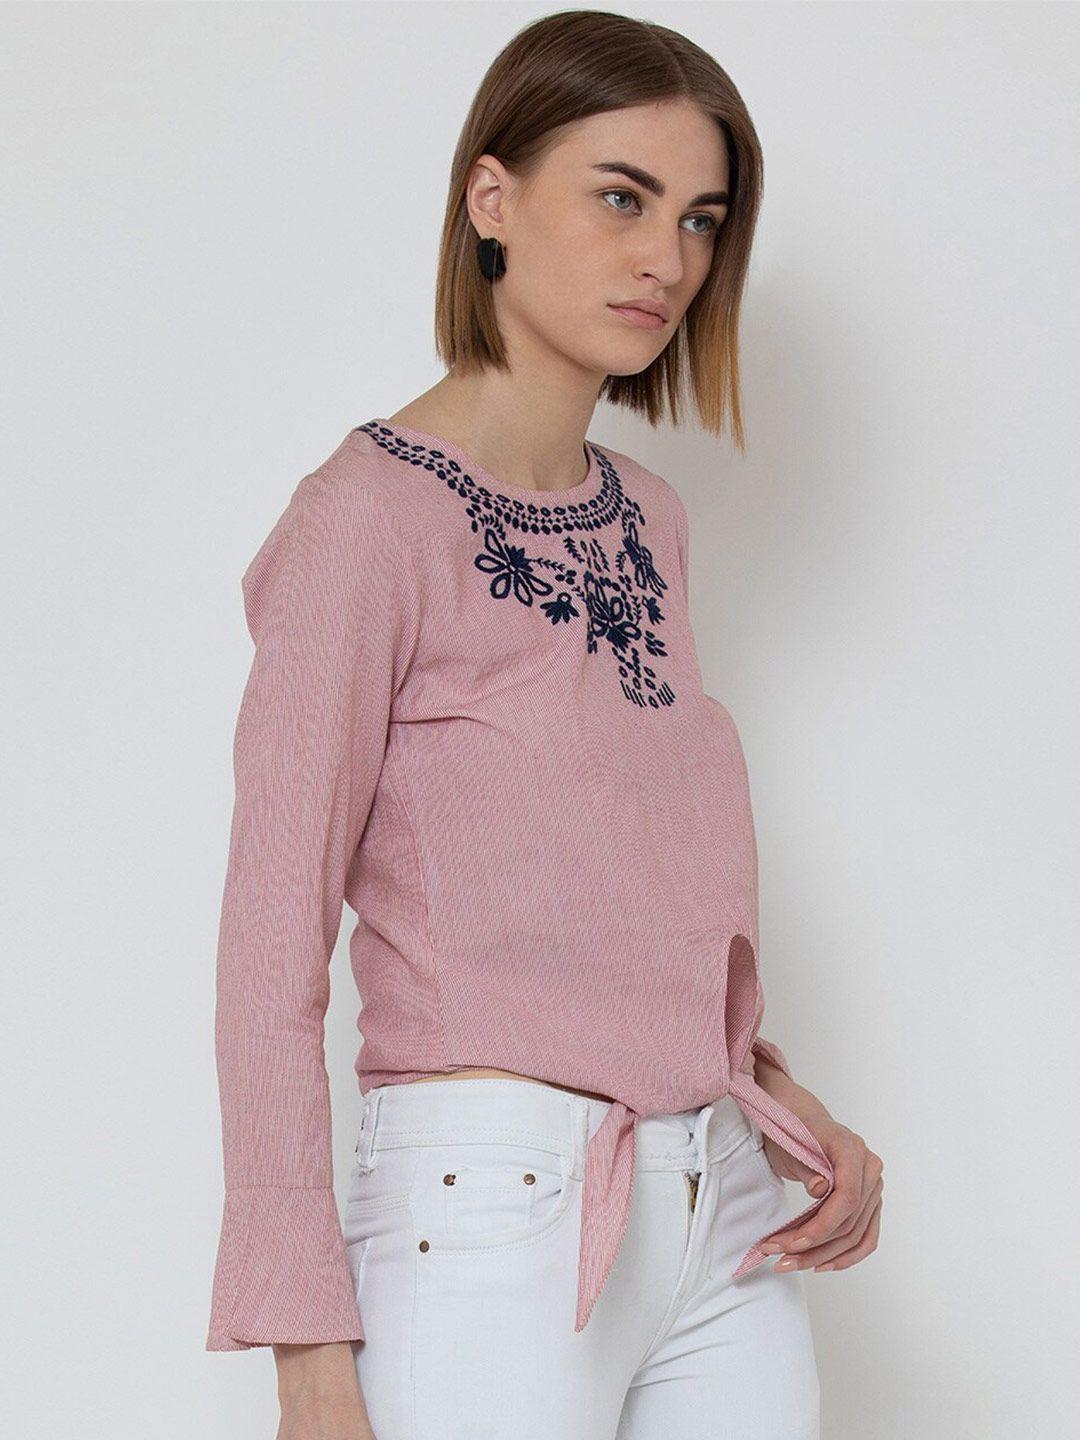 dodo & moa pink round neck embroidered bell sleeves cotton top